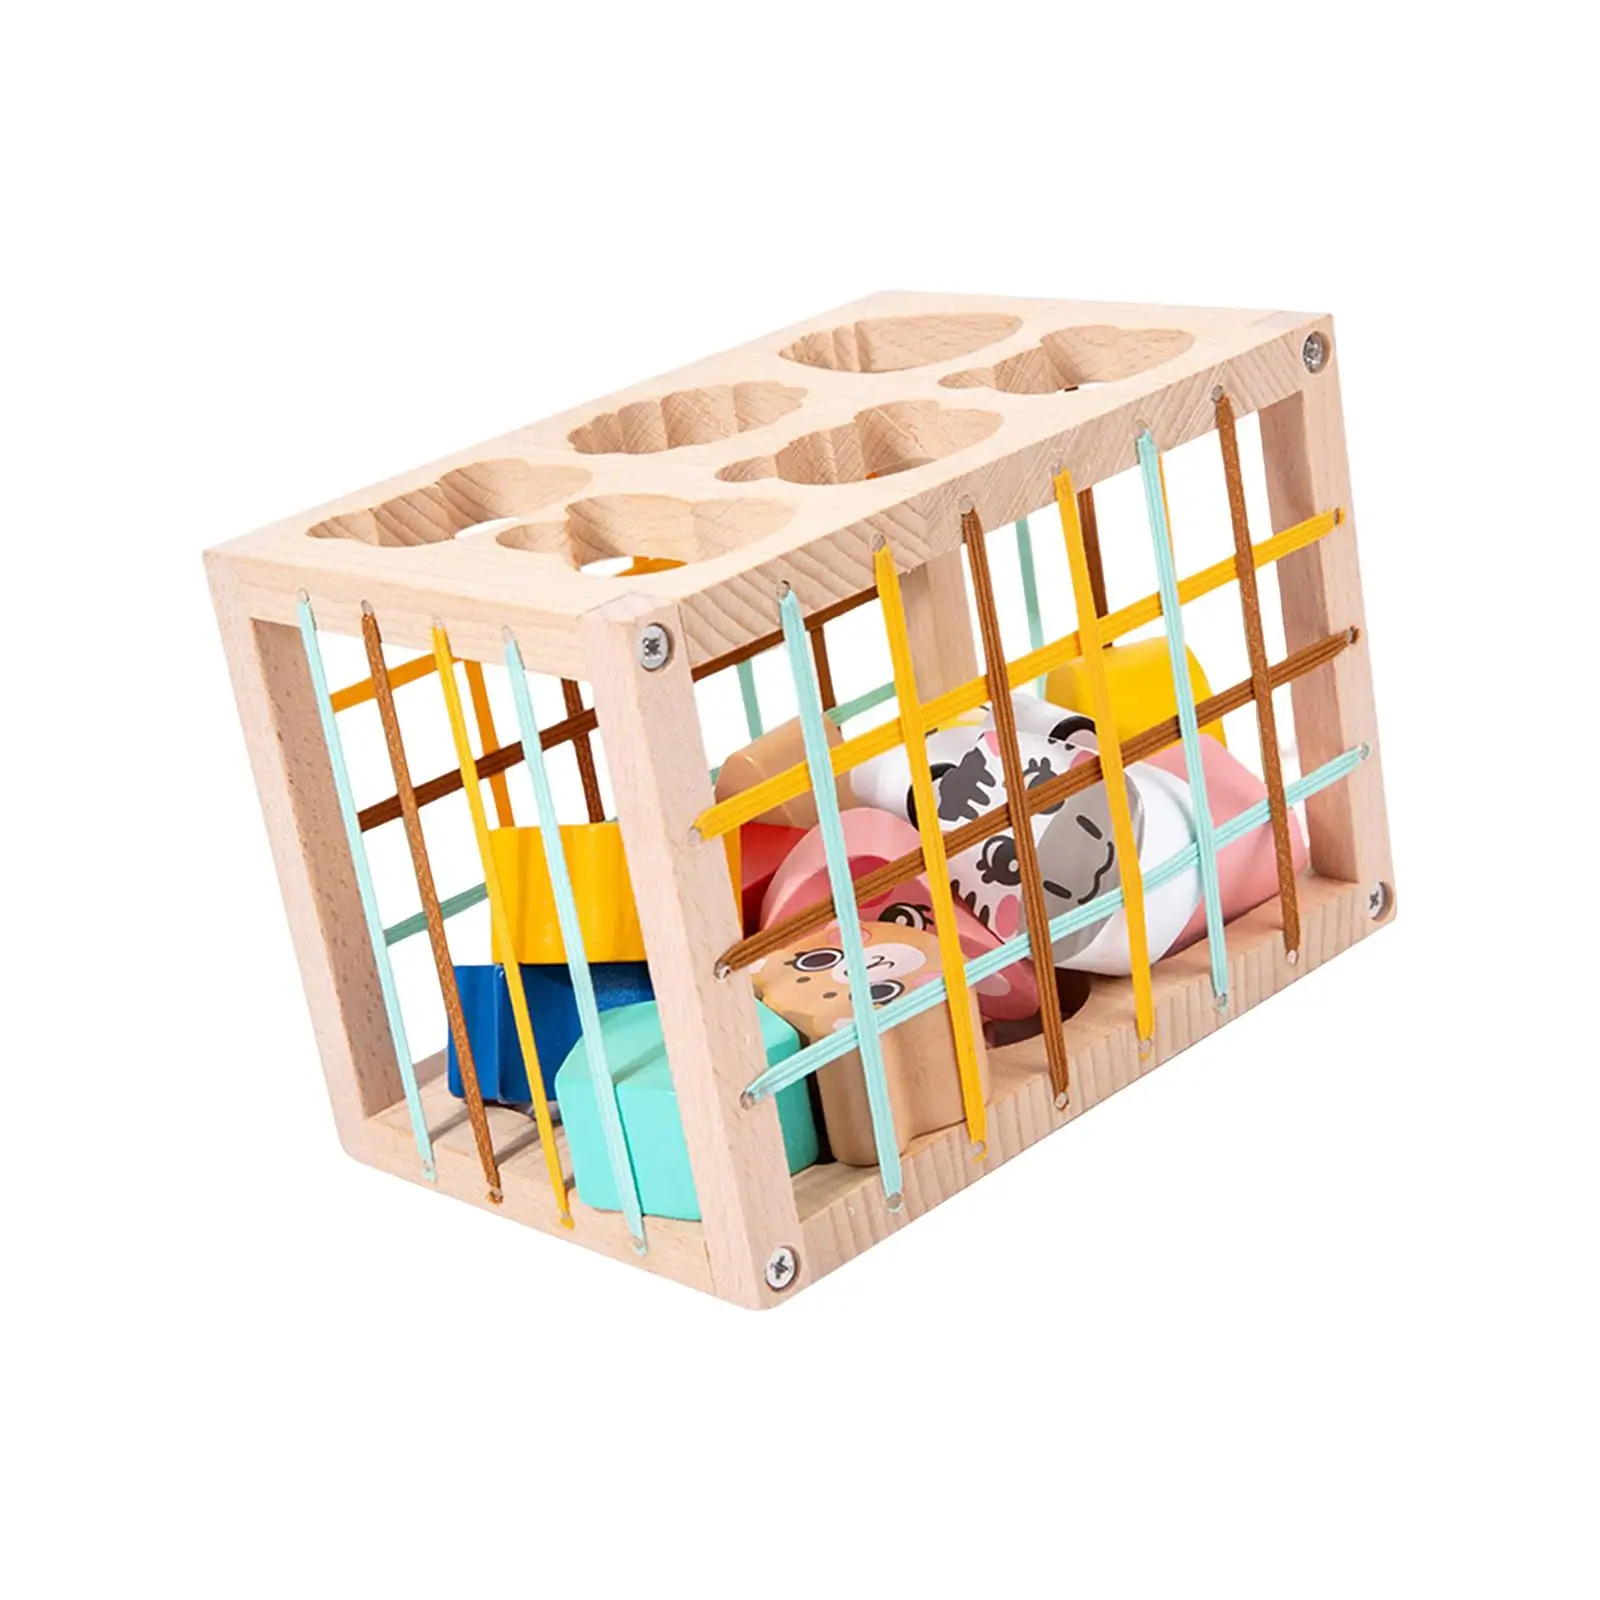 Wooden Shape Sorter Recognition Fine Motor Skills Educational Toy Sensory Matching Puzzle Toy for Baby Preschool Children Kids